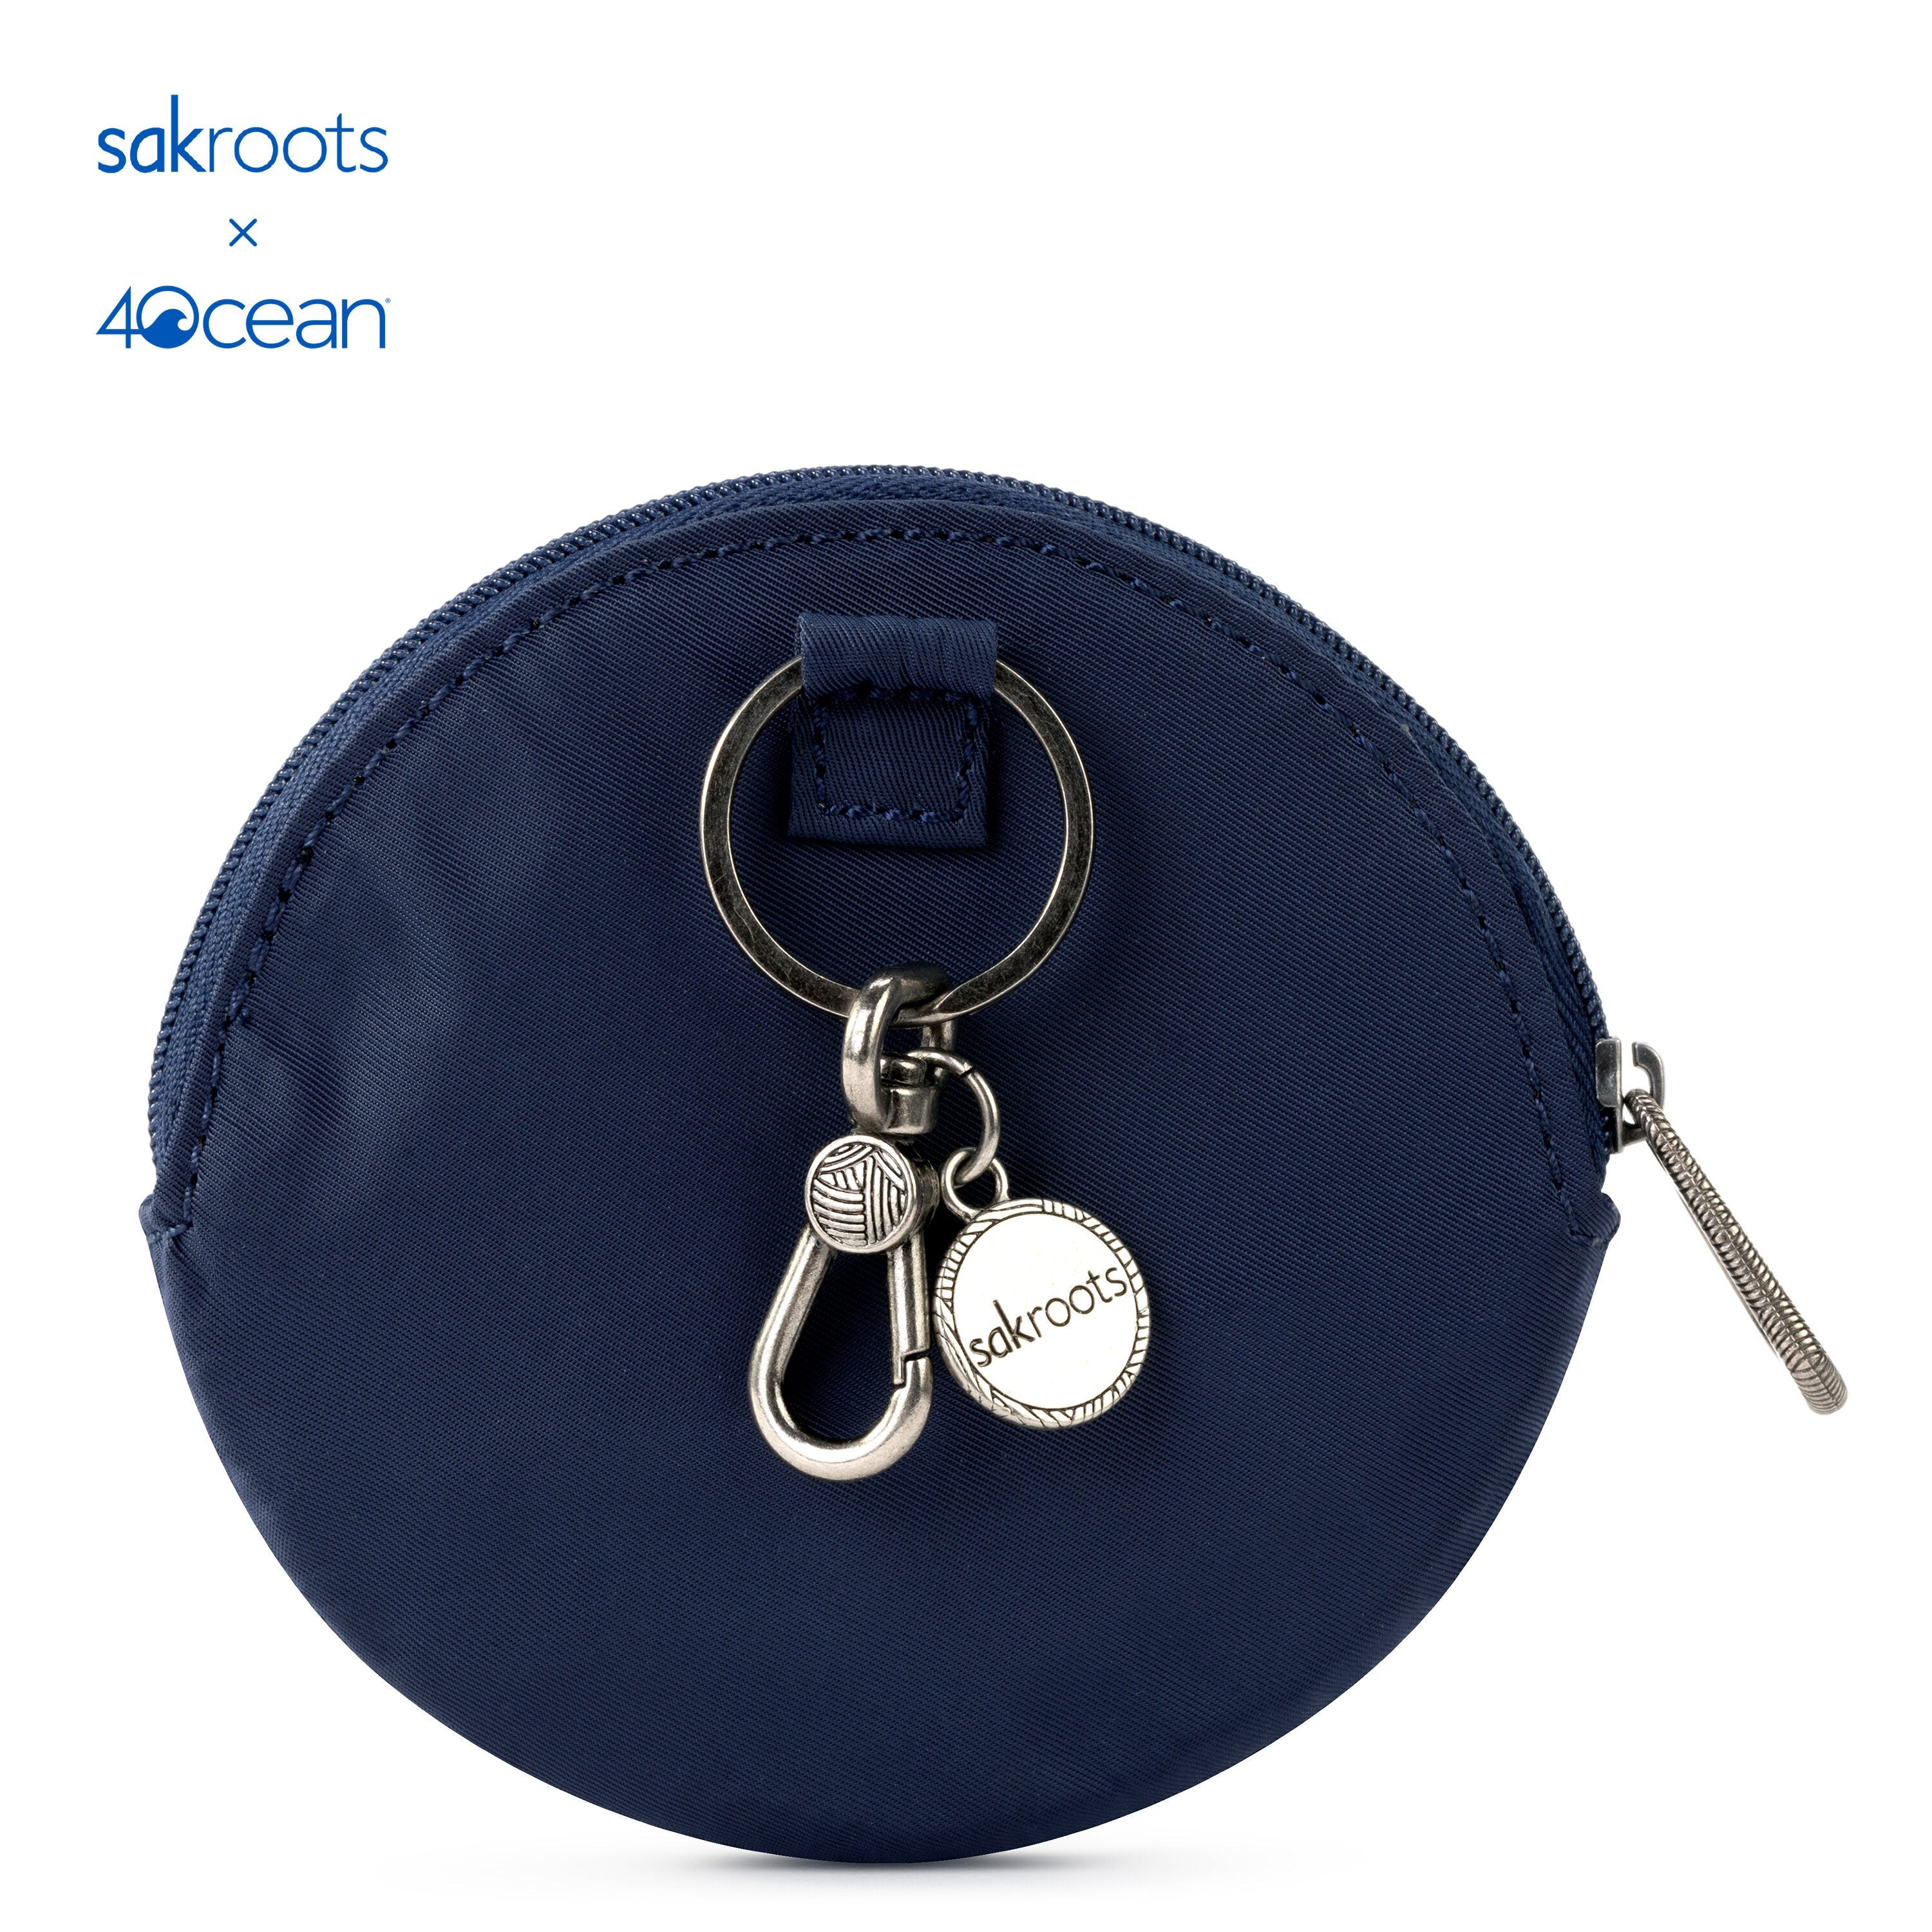 Sakroots x 4ocean On-the-Go Sling Backpack with Coin Purse